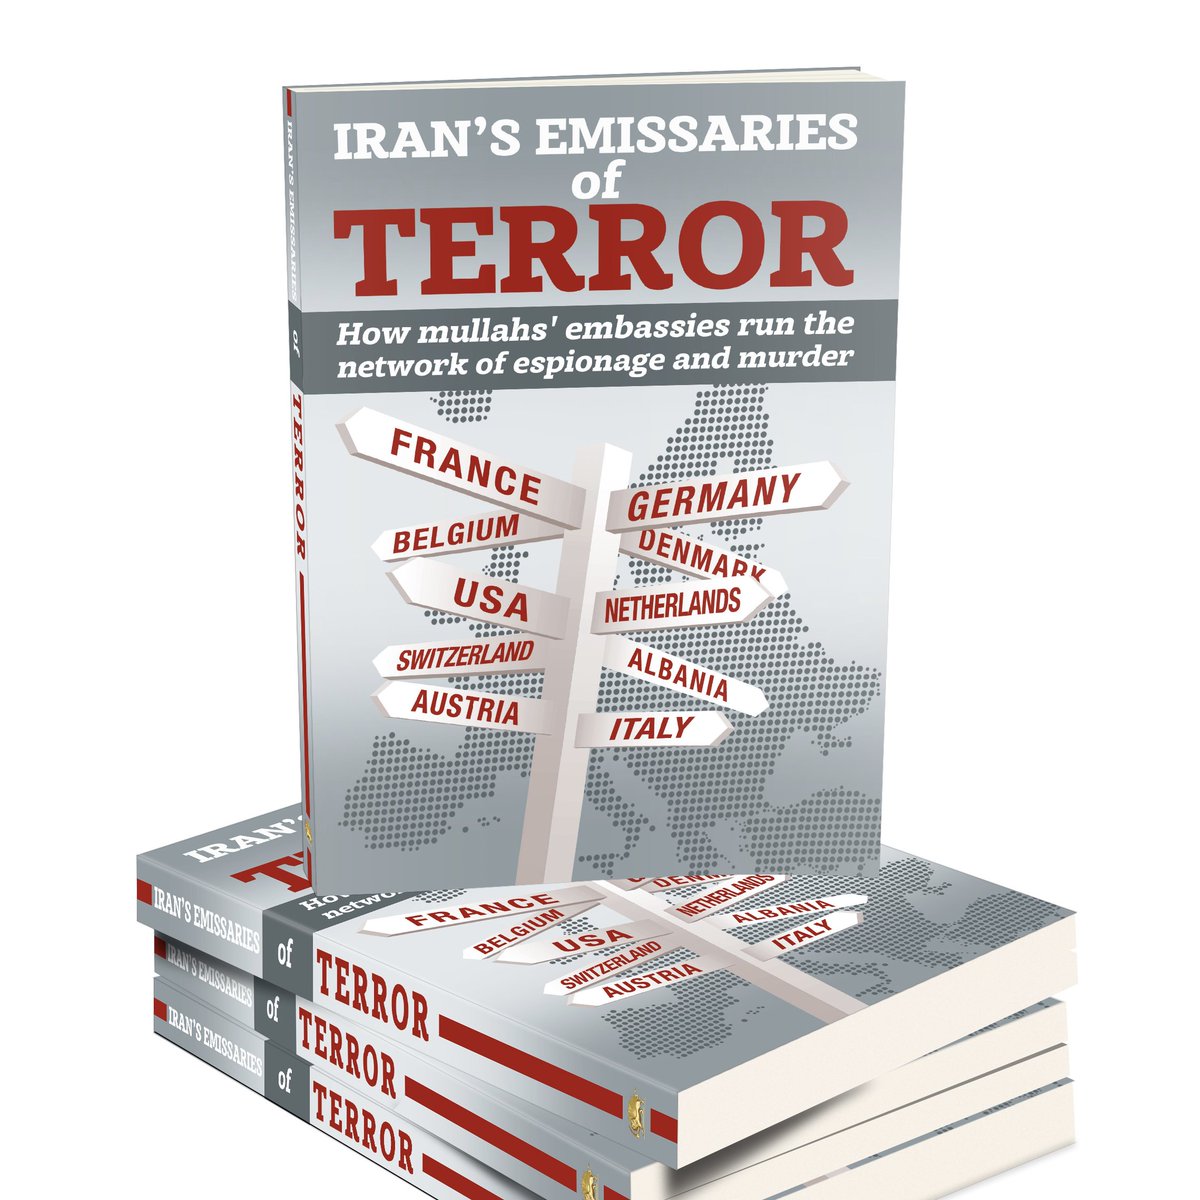 As Zarif confessed in the leaked tape, Iranian regime embassies are terror hubs, its diplomats are emissaries of terror, including those sitting at the negotiating table. Time for accountability, not concessions.  @StateDept  #ShutDownIranTerrorEmbassies